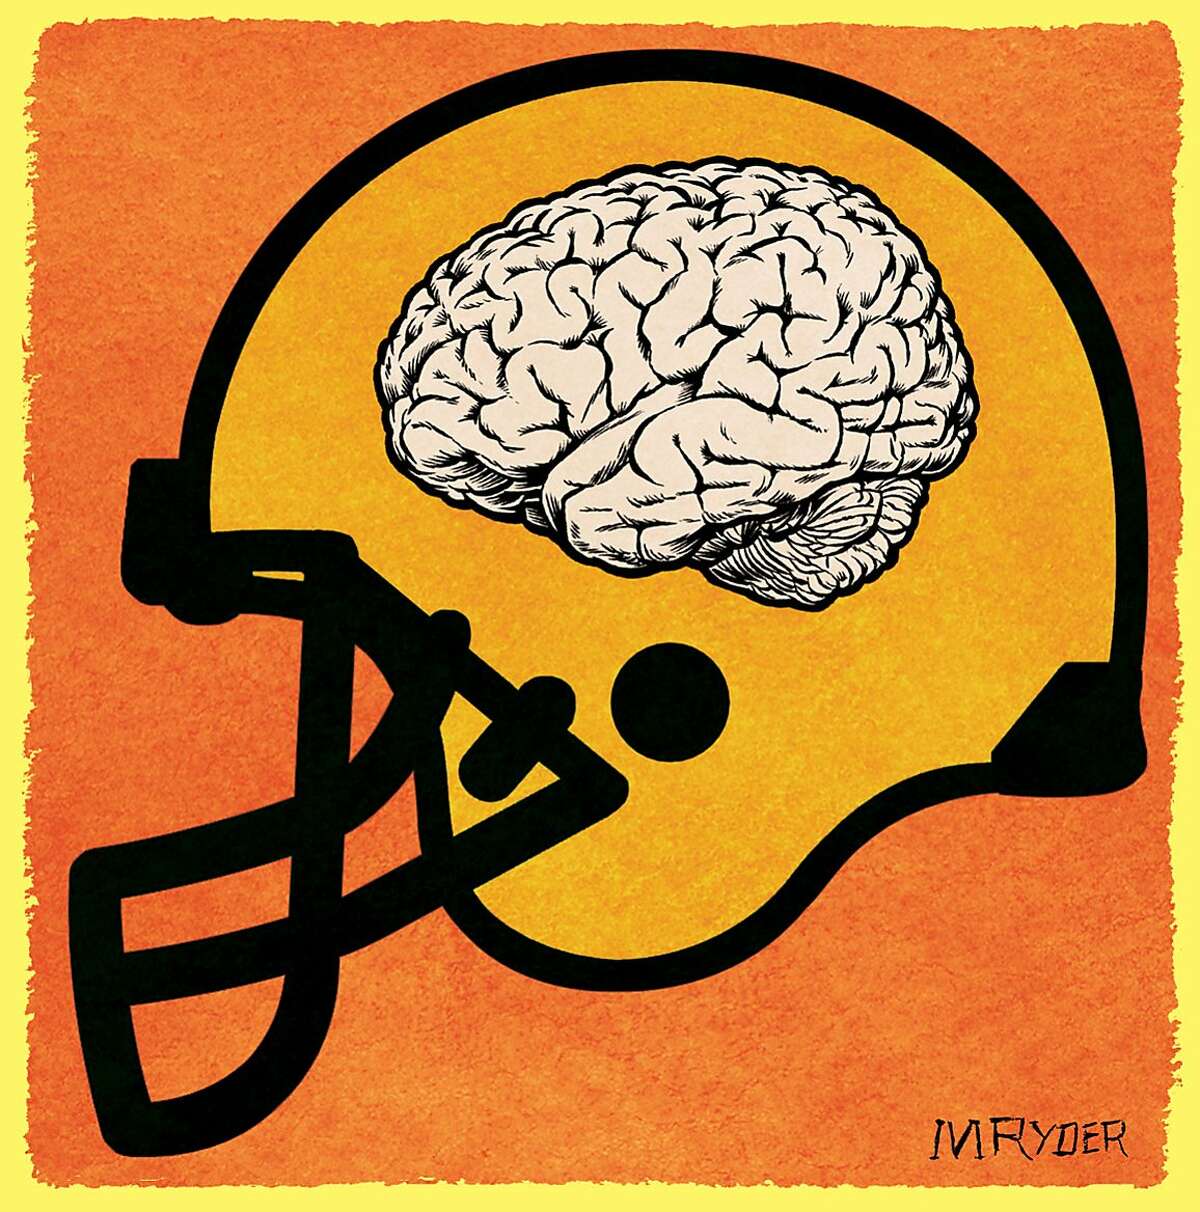 This artwork by M. Ryder relates to brain concussions suffered by football players.